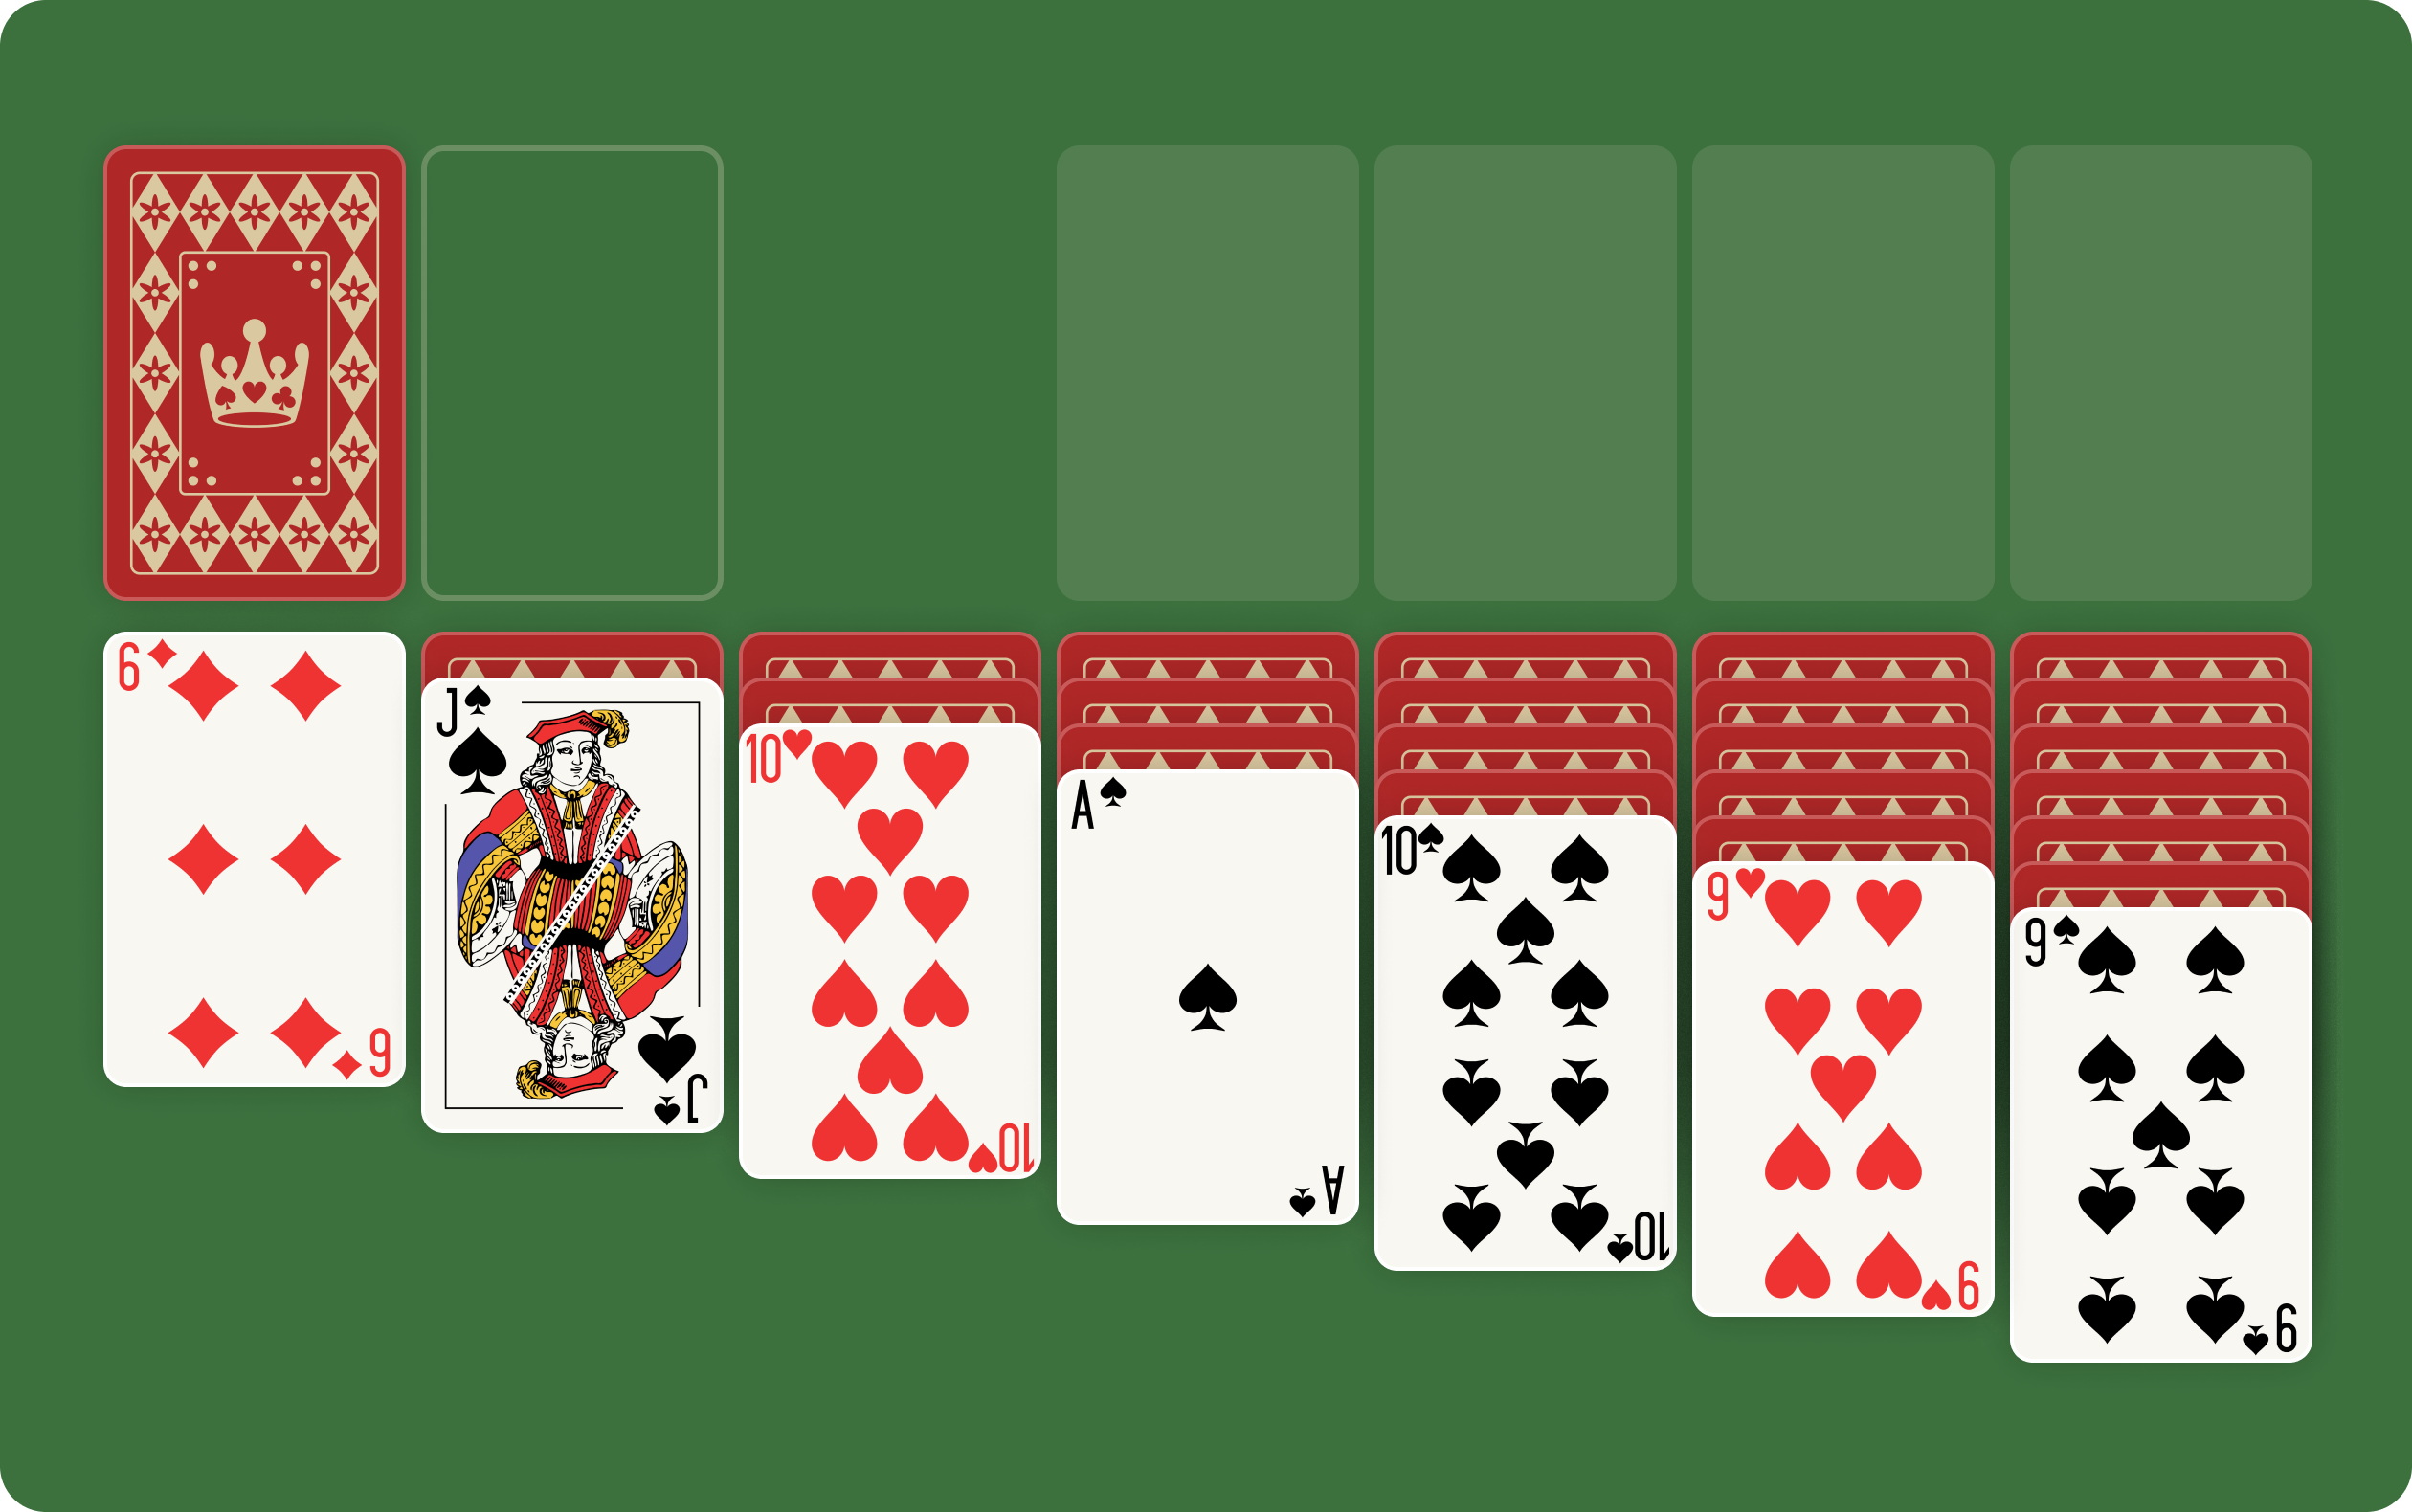 The Legends of Solitaire